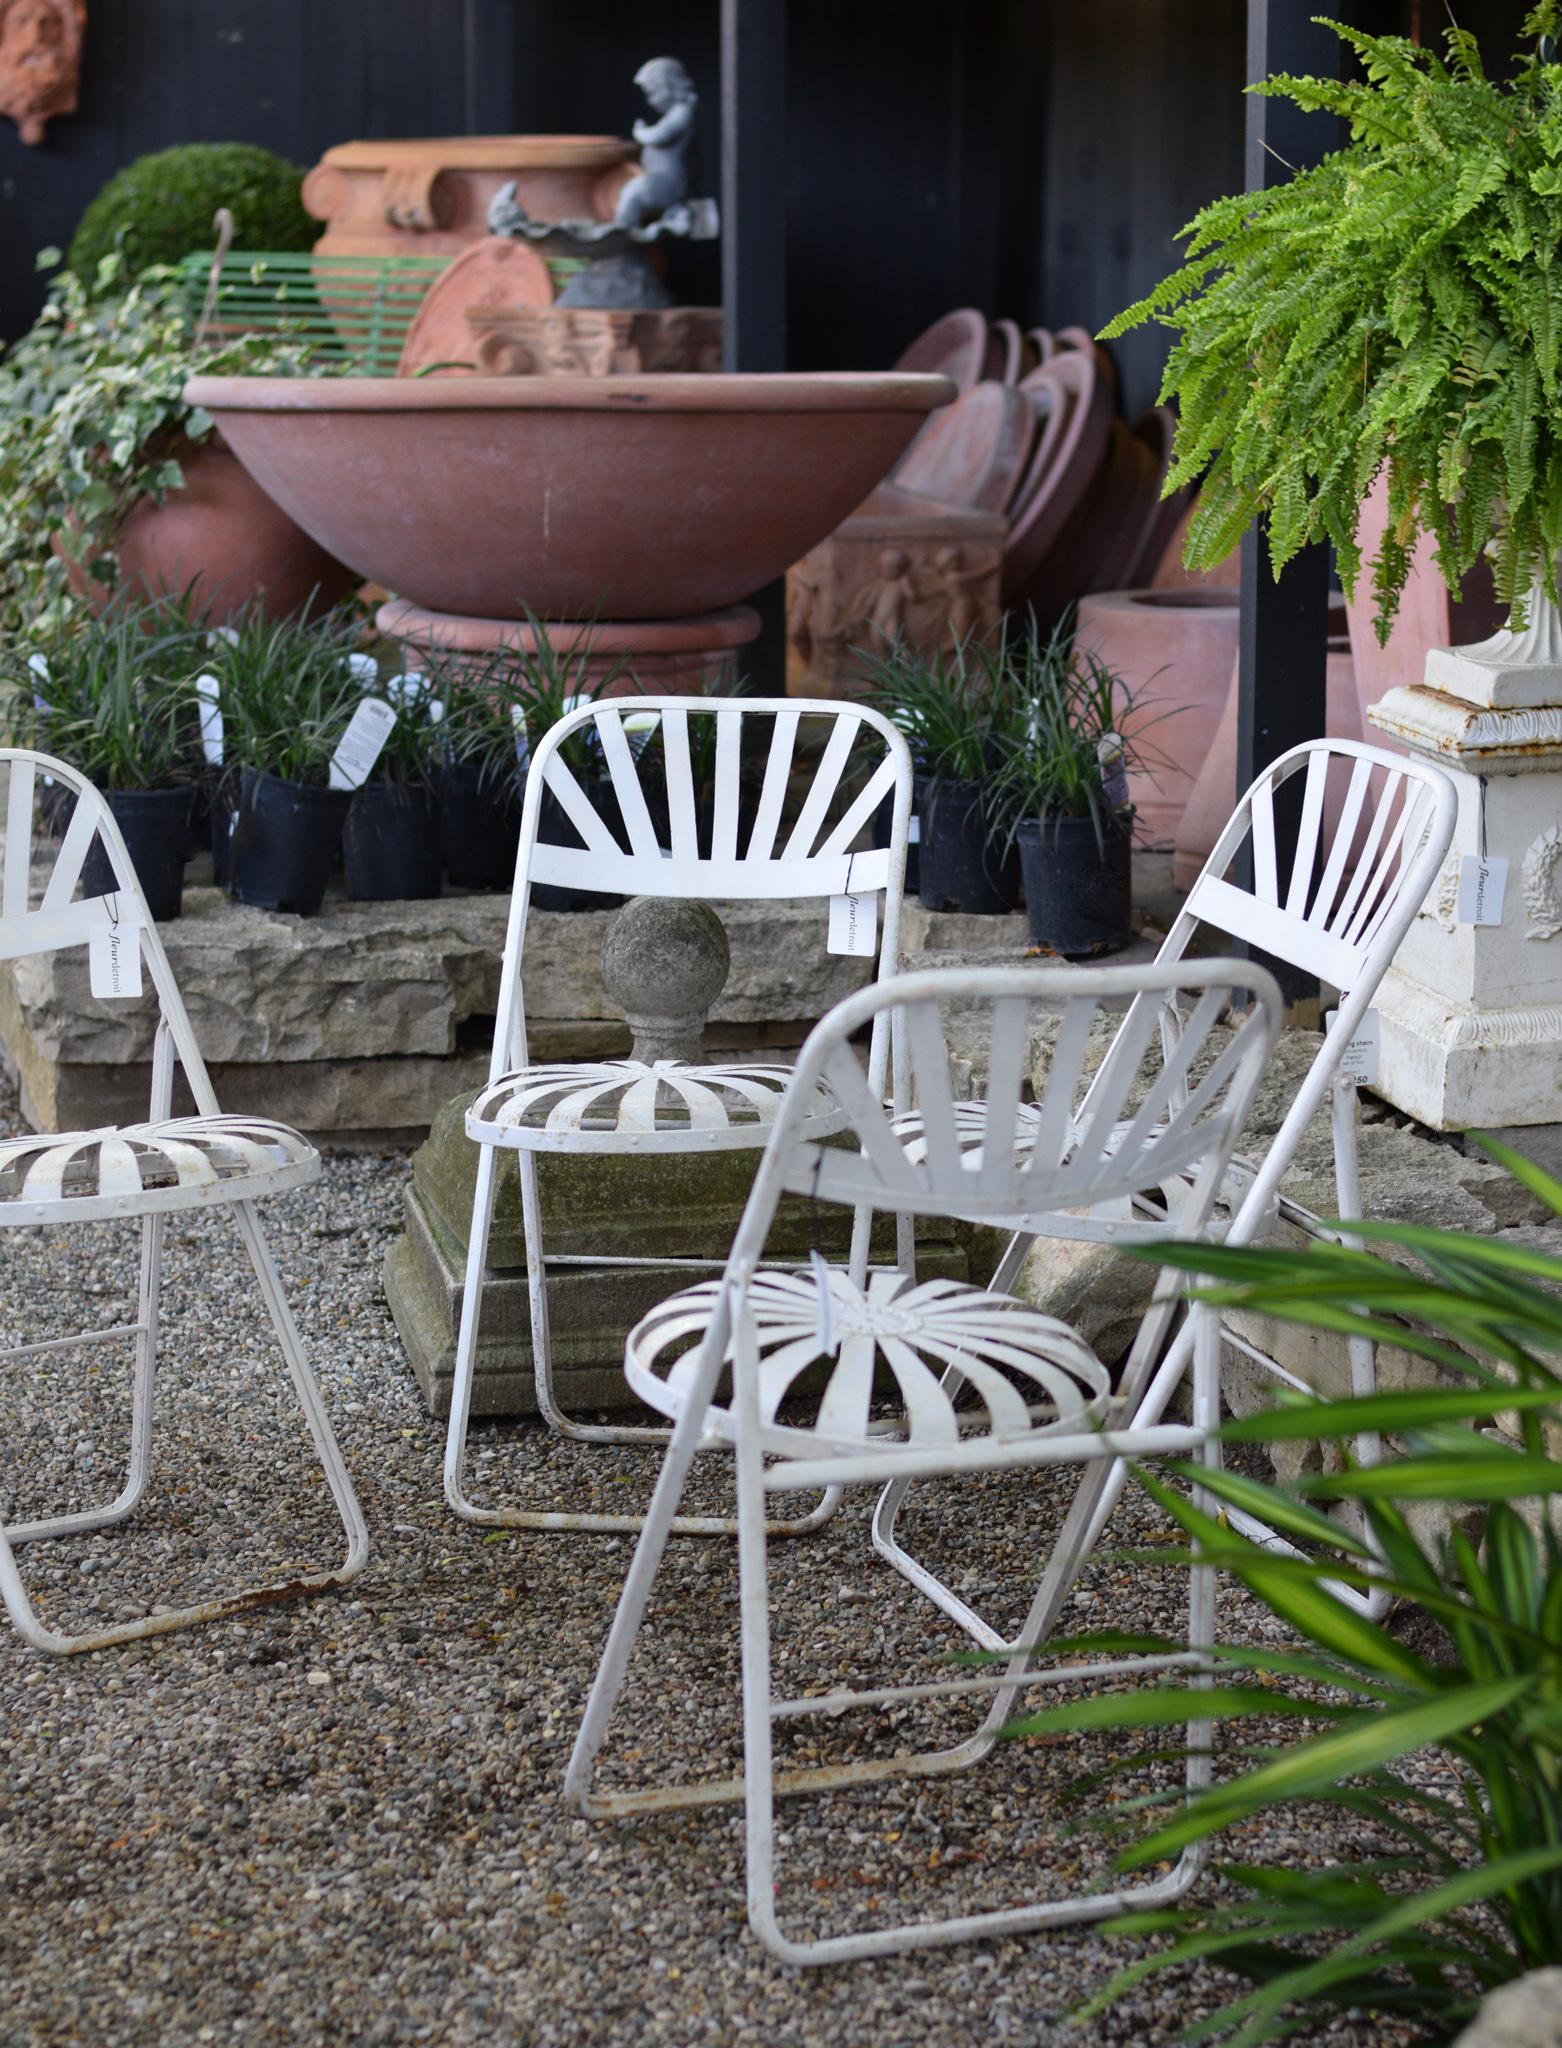 For your consideration, a stunning set of four folding garden chairs. Based on models from the late 19th century, these iron chairs are in excellent stable condition and ready for any outdoor setting.